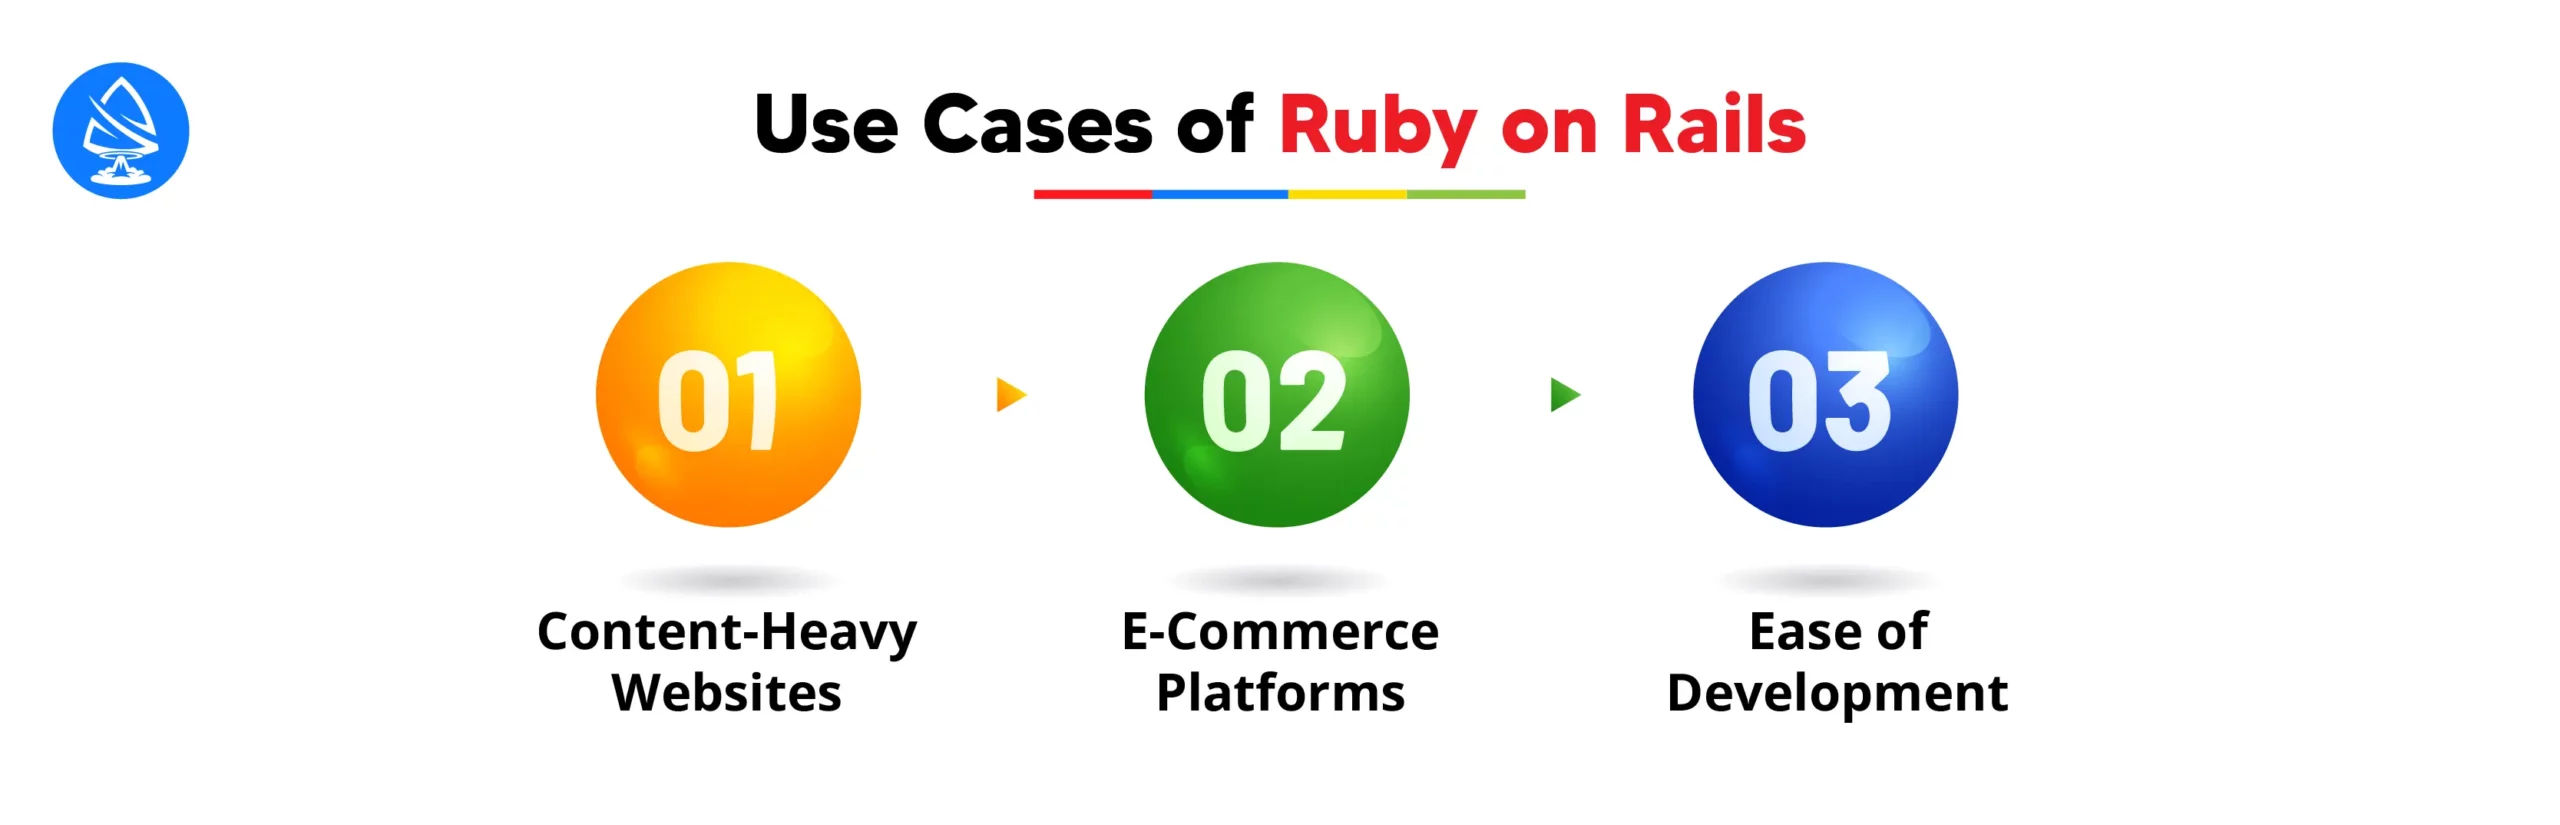 Ruby on Rails vs Node js: Use Cases of Ruby on Rails (RoR) 